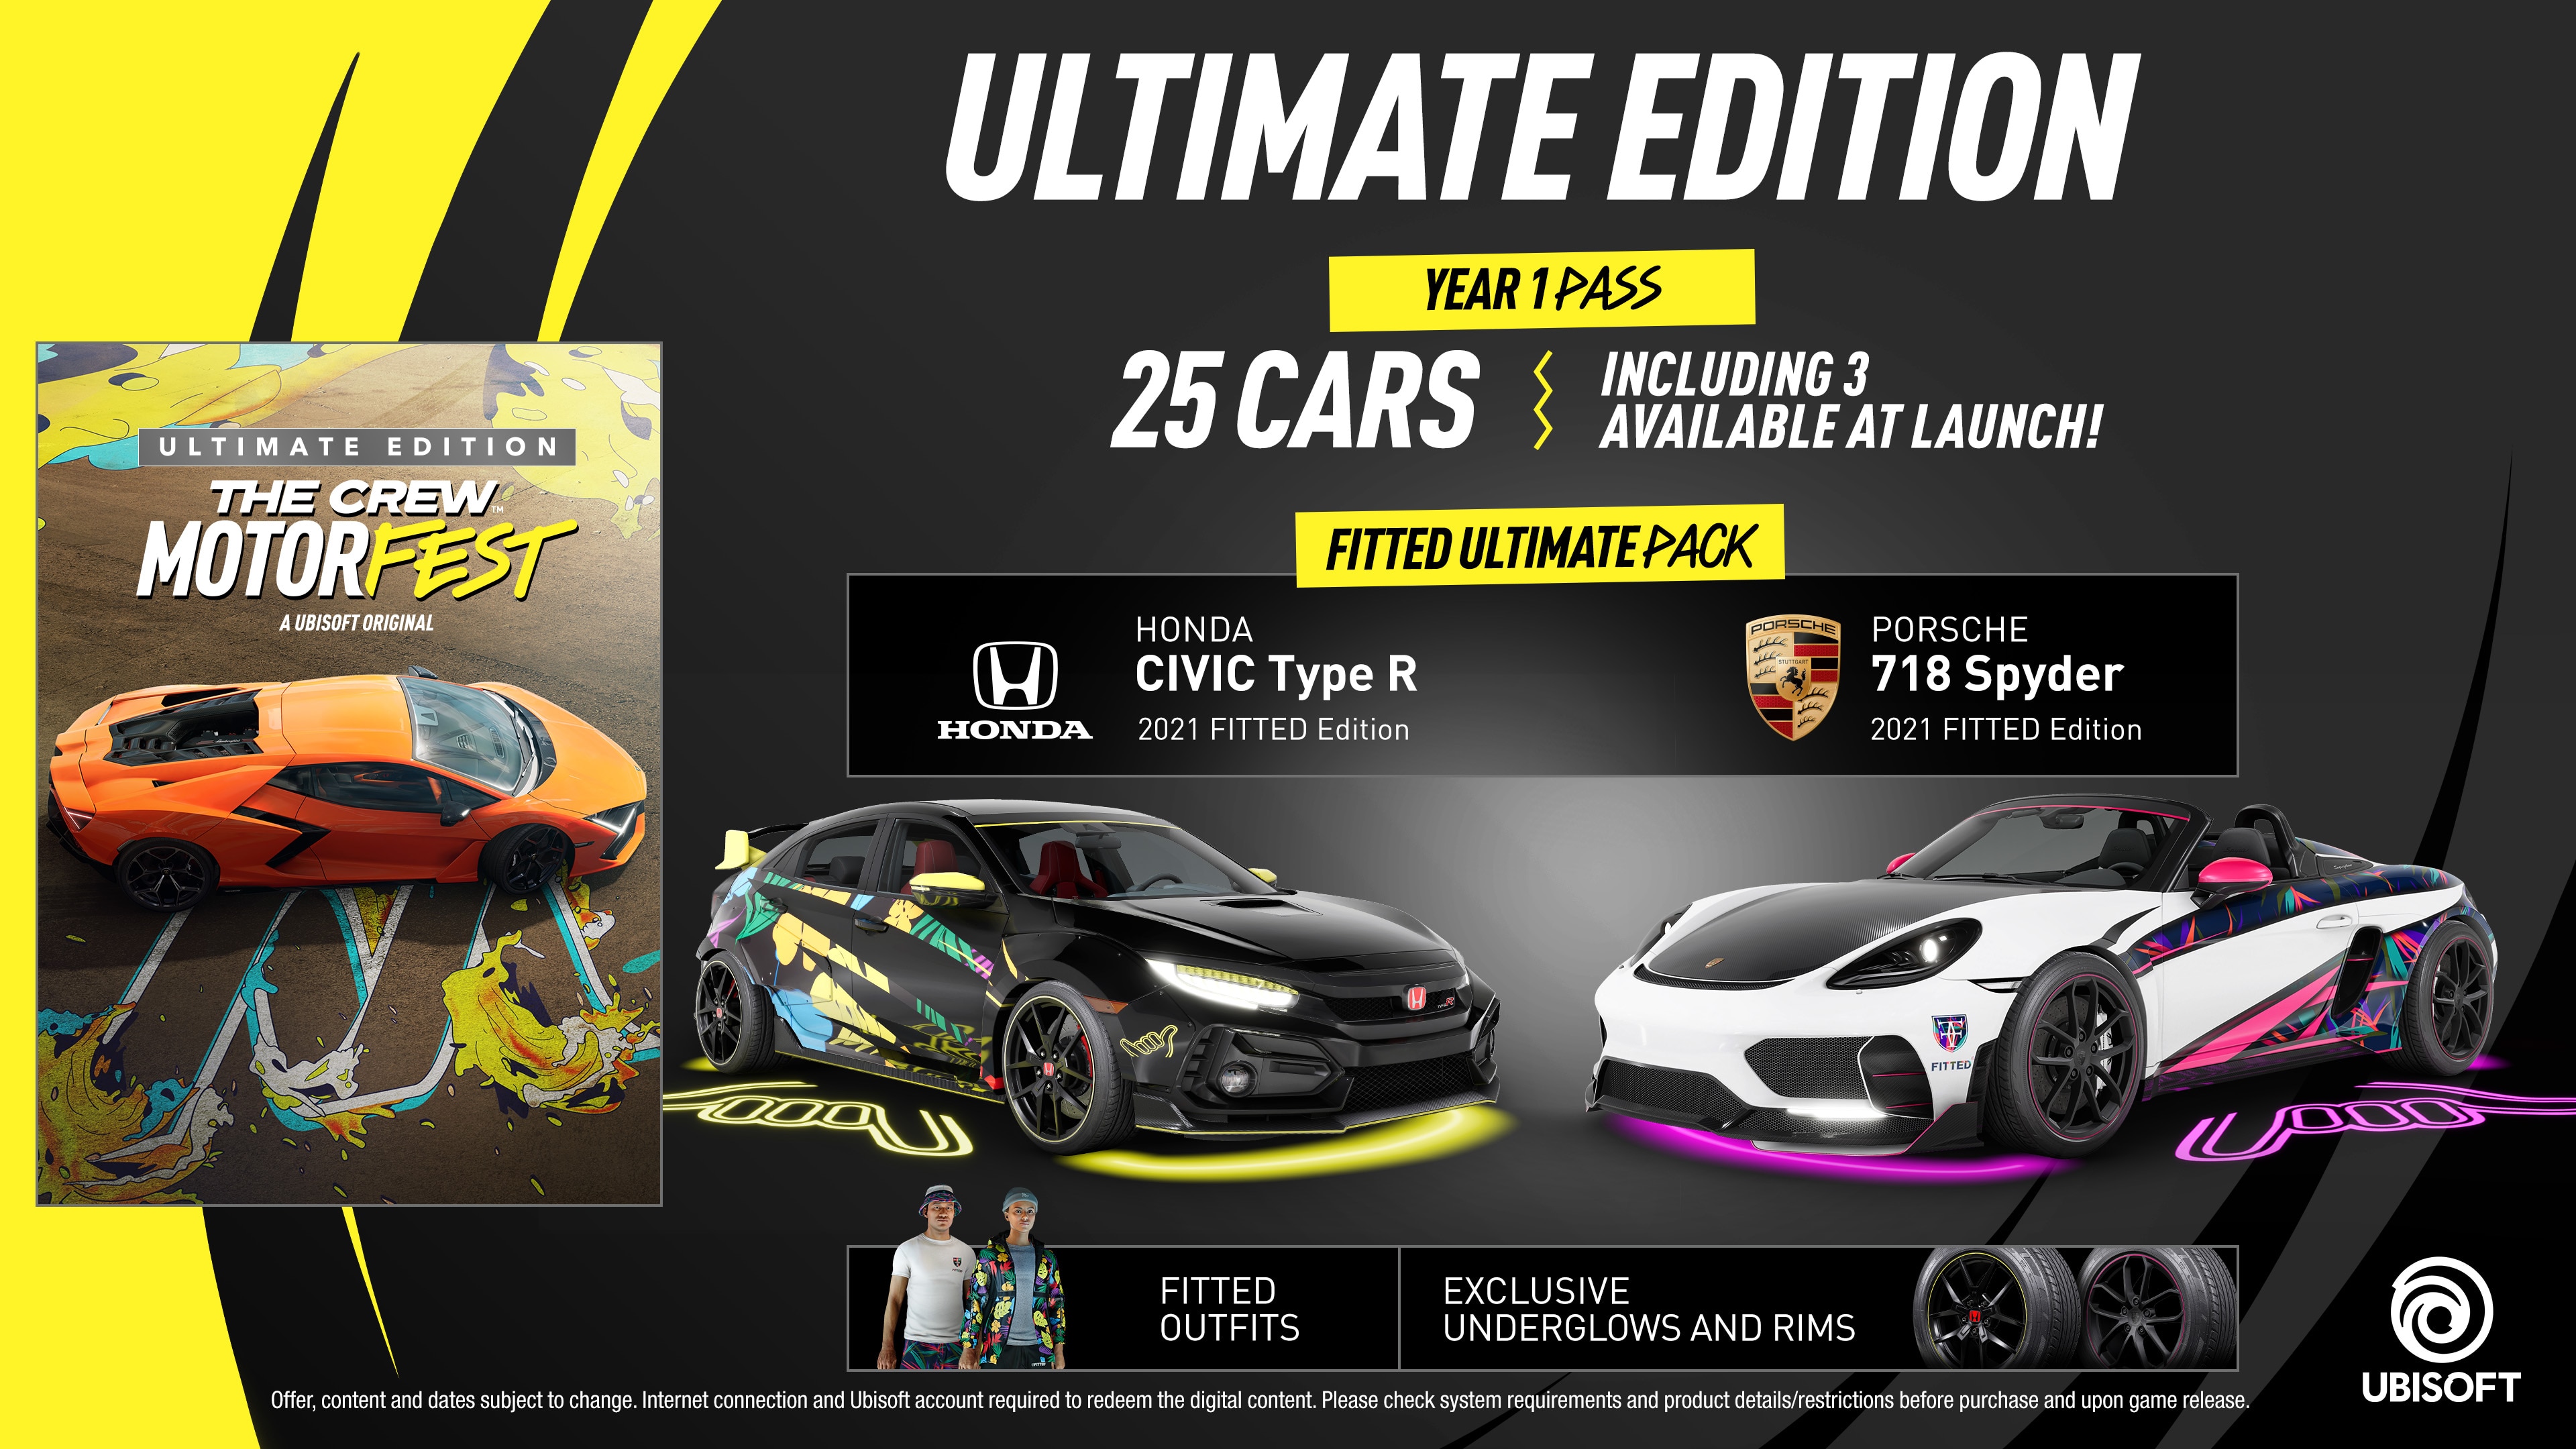 The Crew 2 Season Pass at the best price